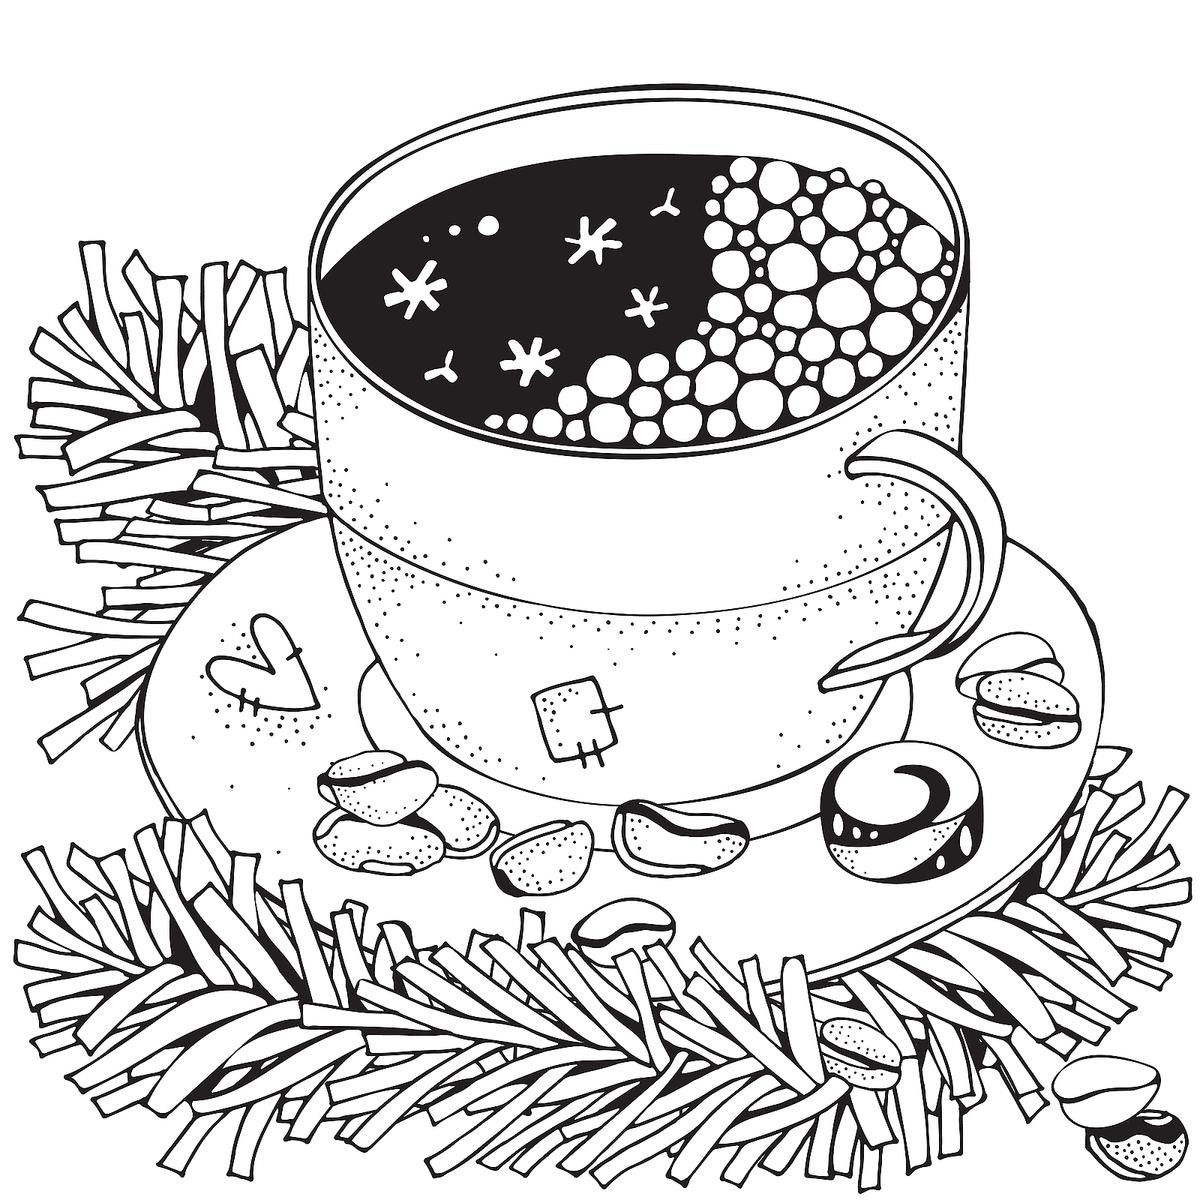 Winter Coloring Pages For Adults
 Winter Puzzle & Coloring Pages Printable Winter Themed